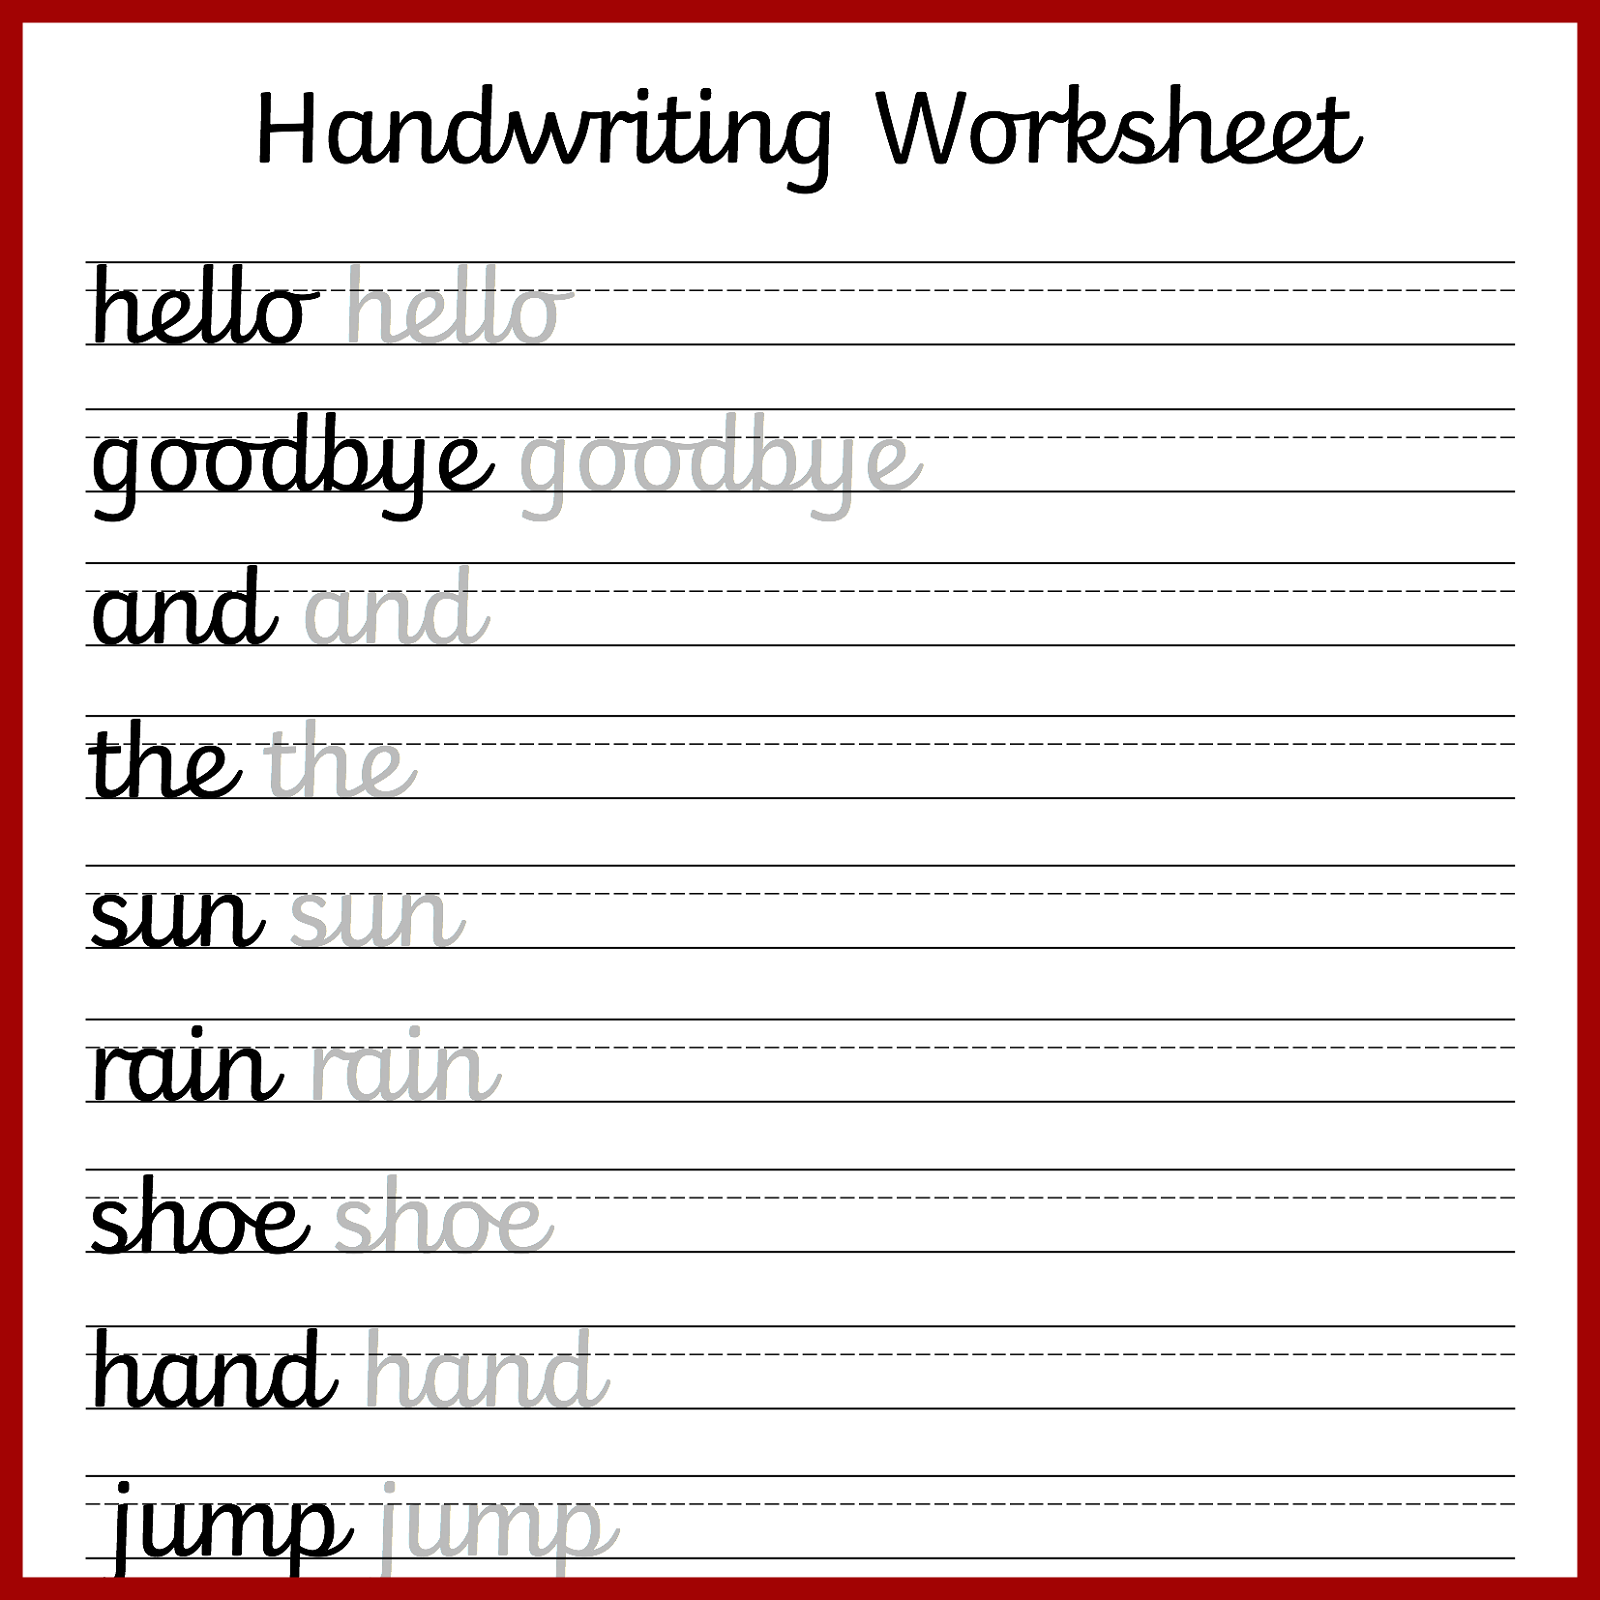 Hand Writing Worksheets For Students 2019 Educative Printable 